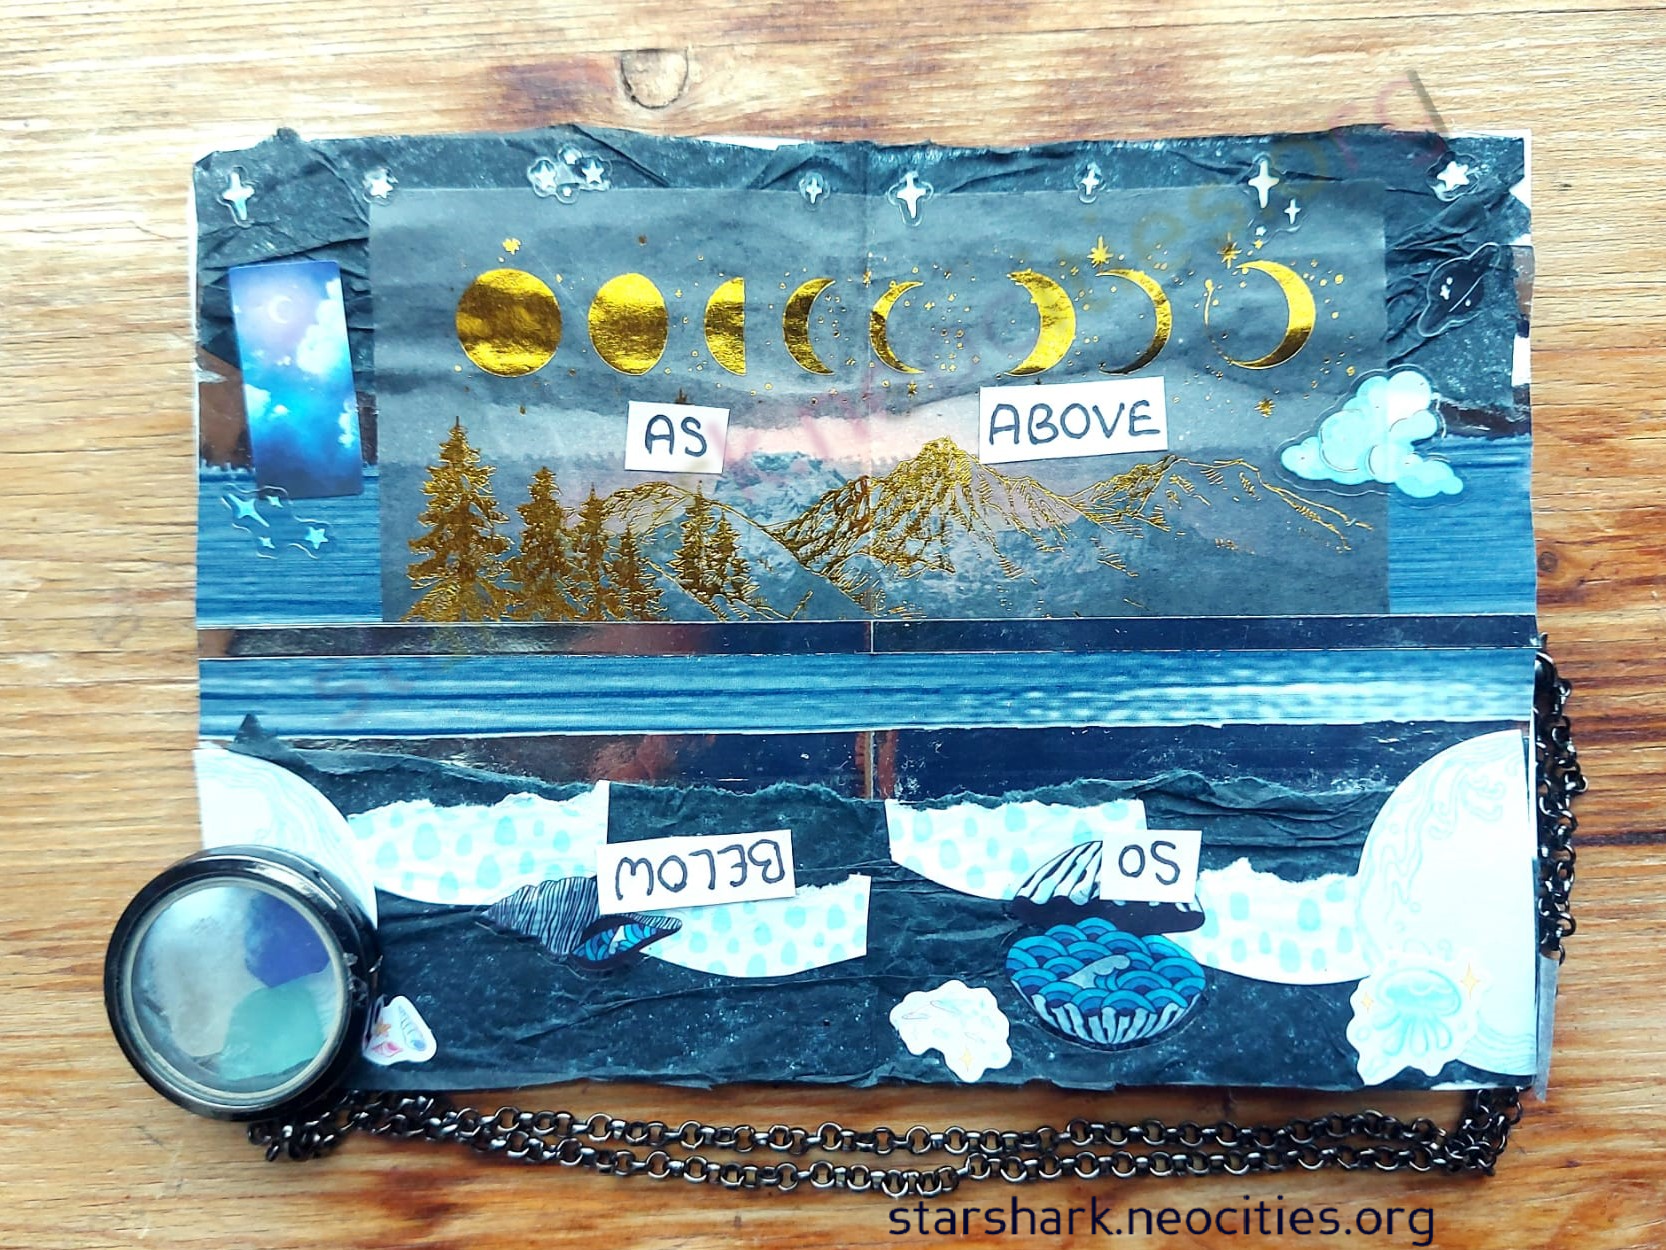 a two page spread of a mini-zine. There are space and sea themed images. It reads 'as above so below'.